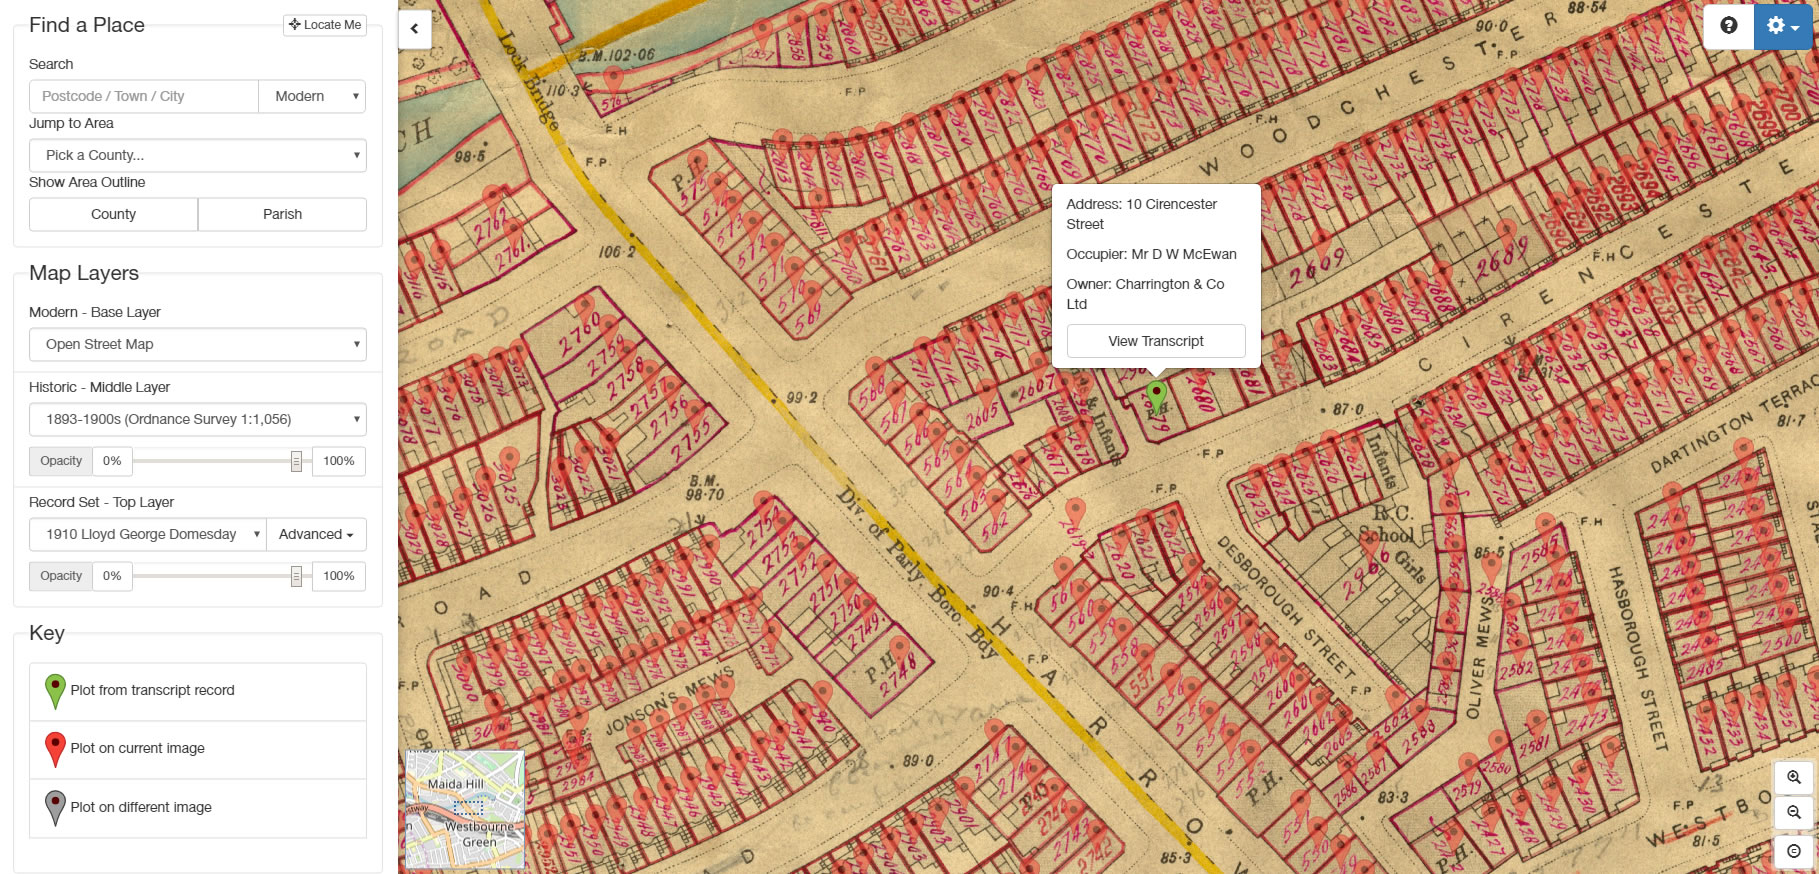 Cirencester Street showing pins for each house recorded in Lloyd George Domesday Survey